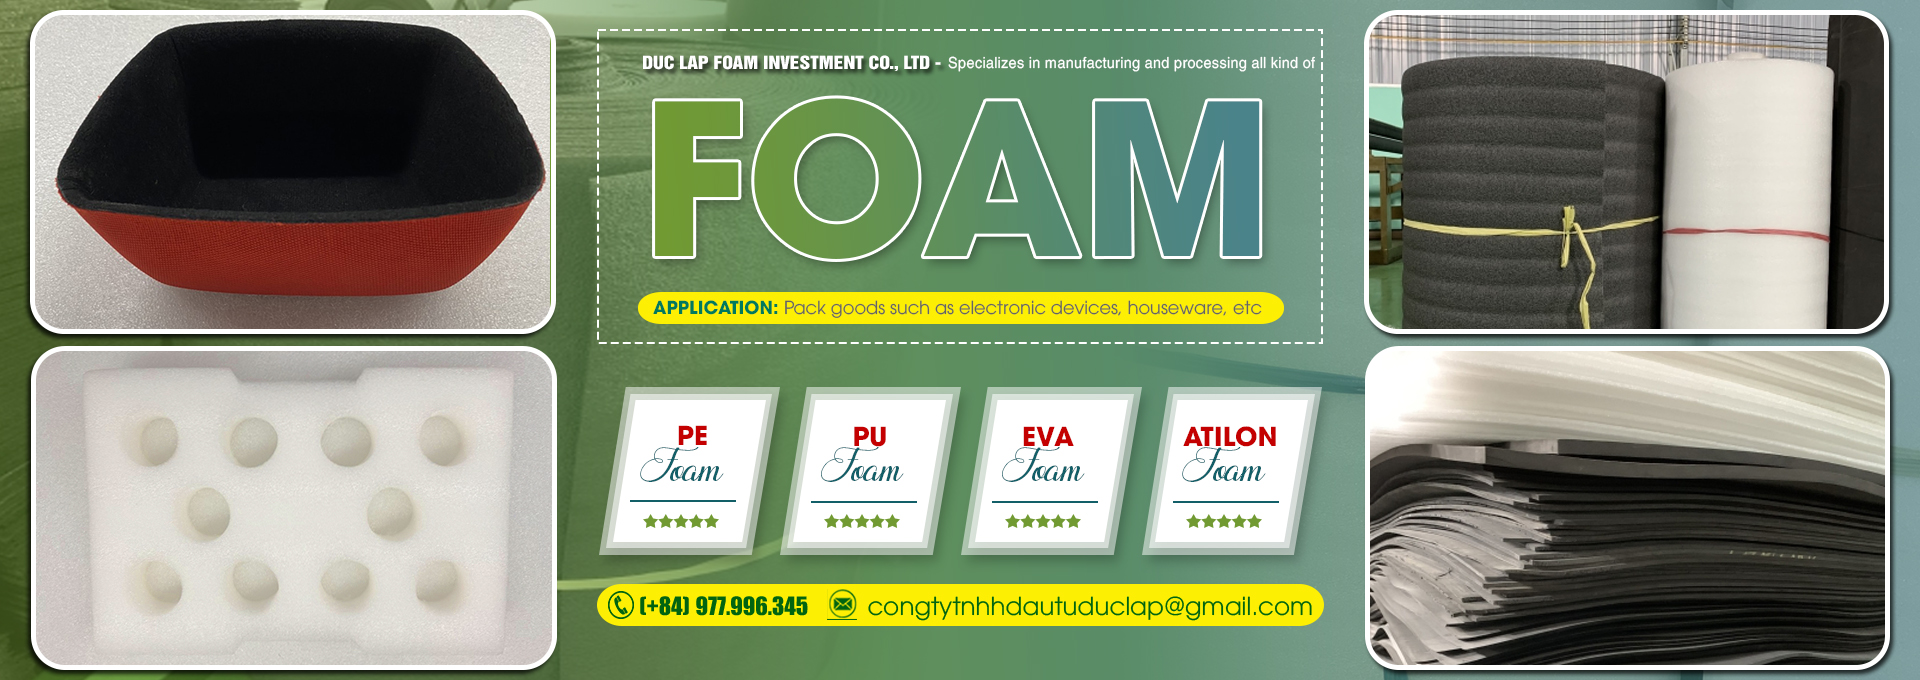 Duc Lap Foam Investment Company Limited